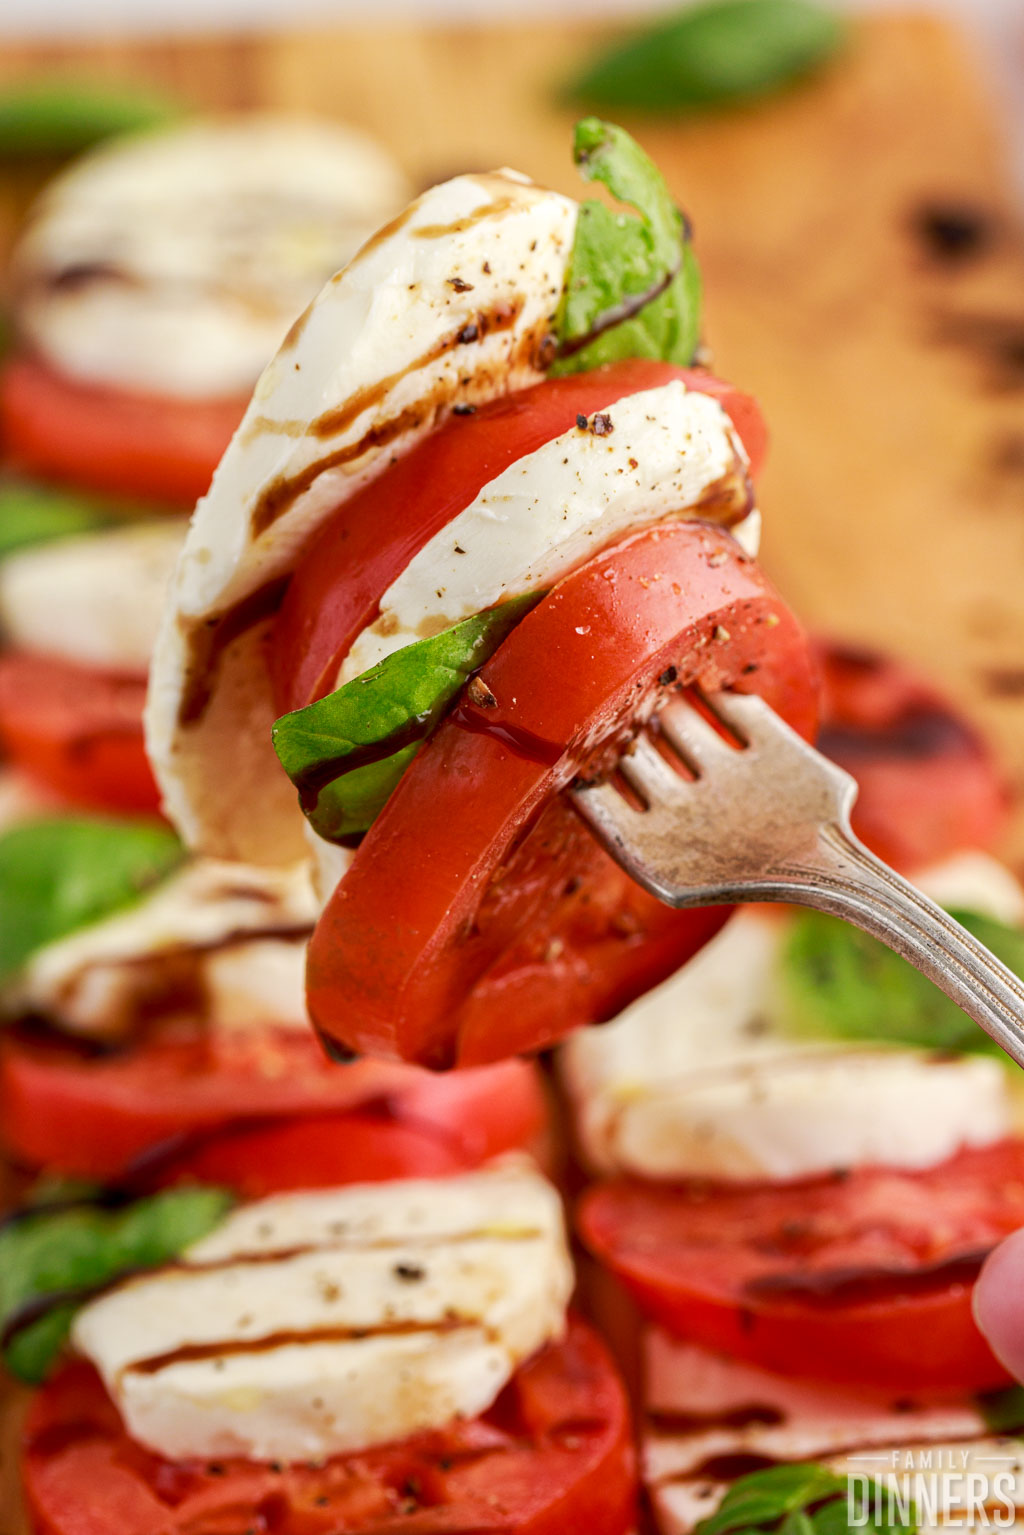 Caprese salad (tomato, mozzarella and basil) with oil and vinegar stacked on a fork.